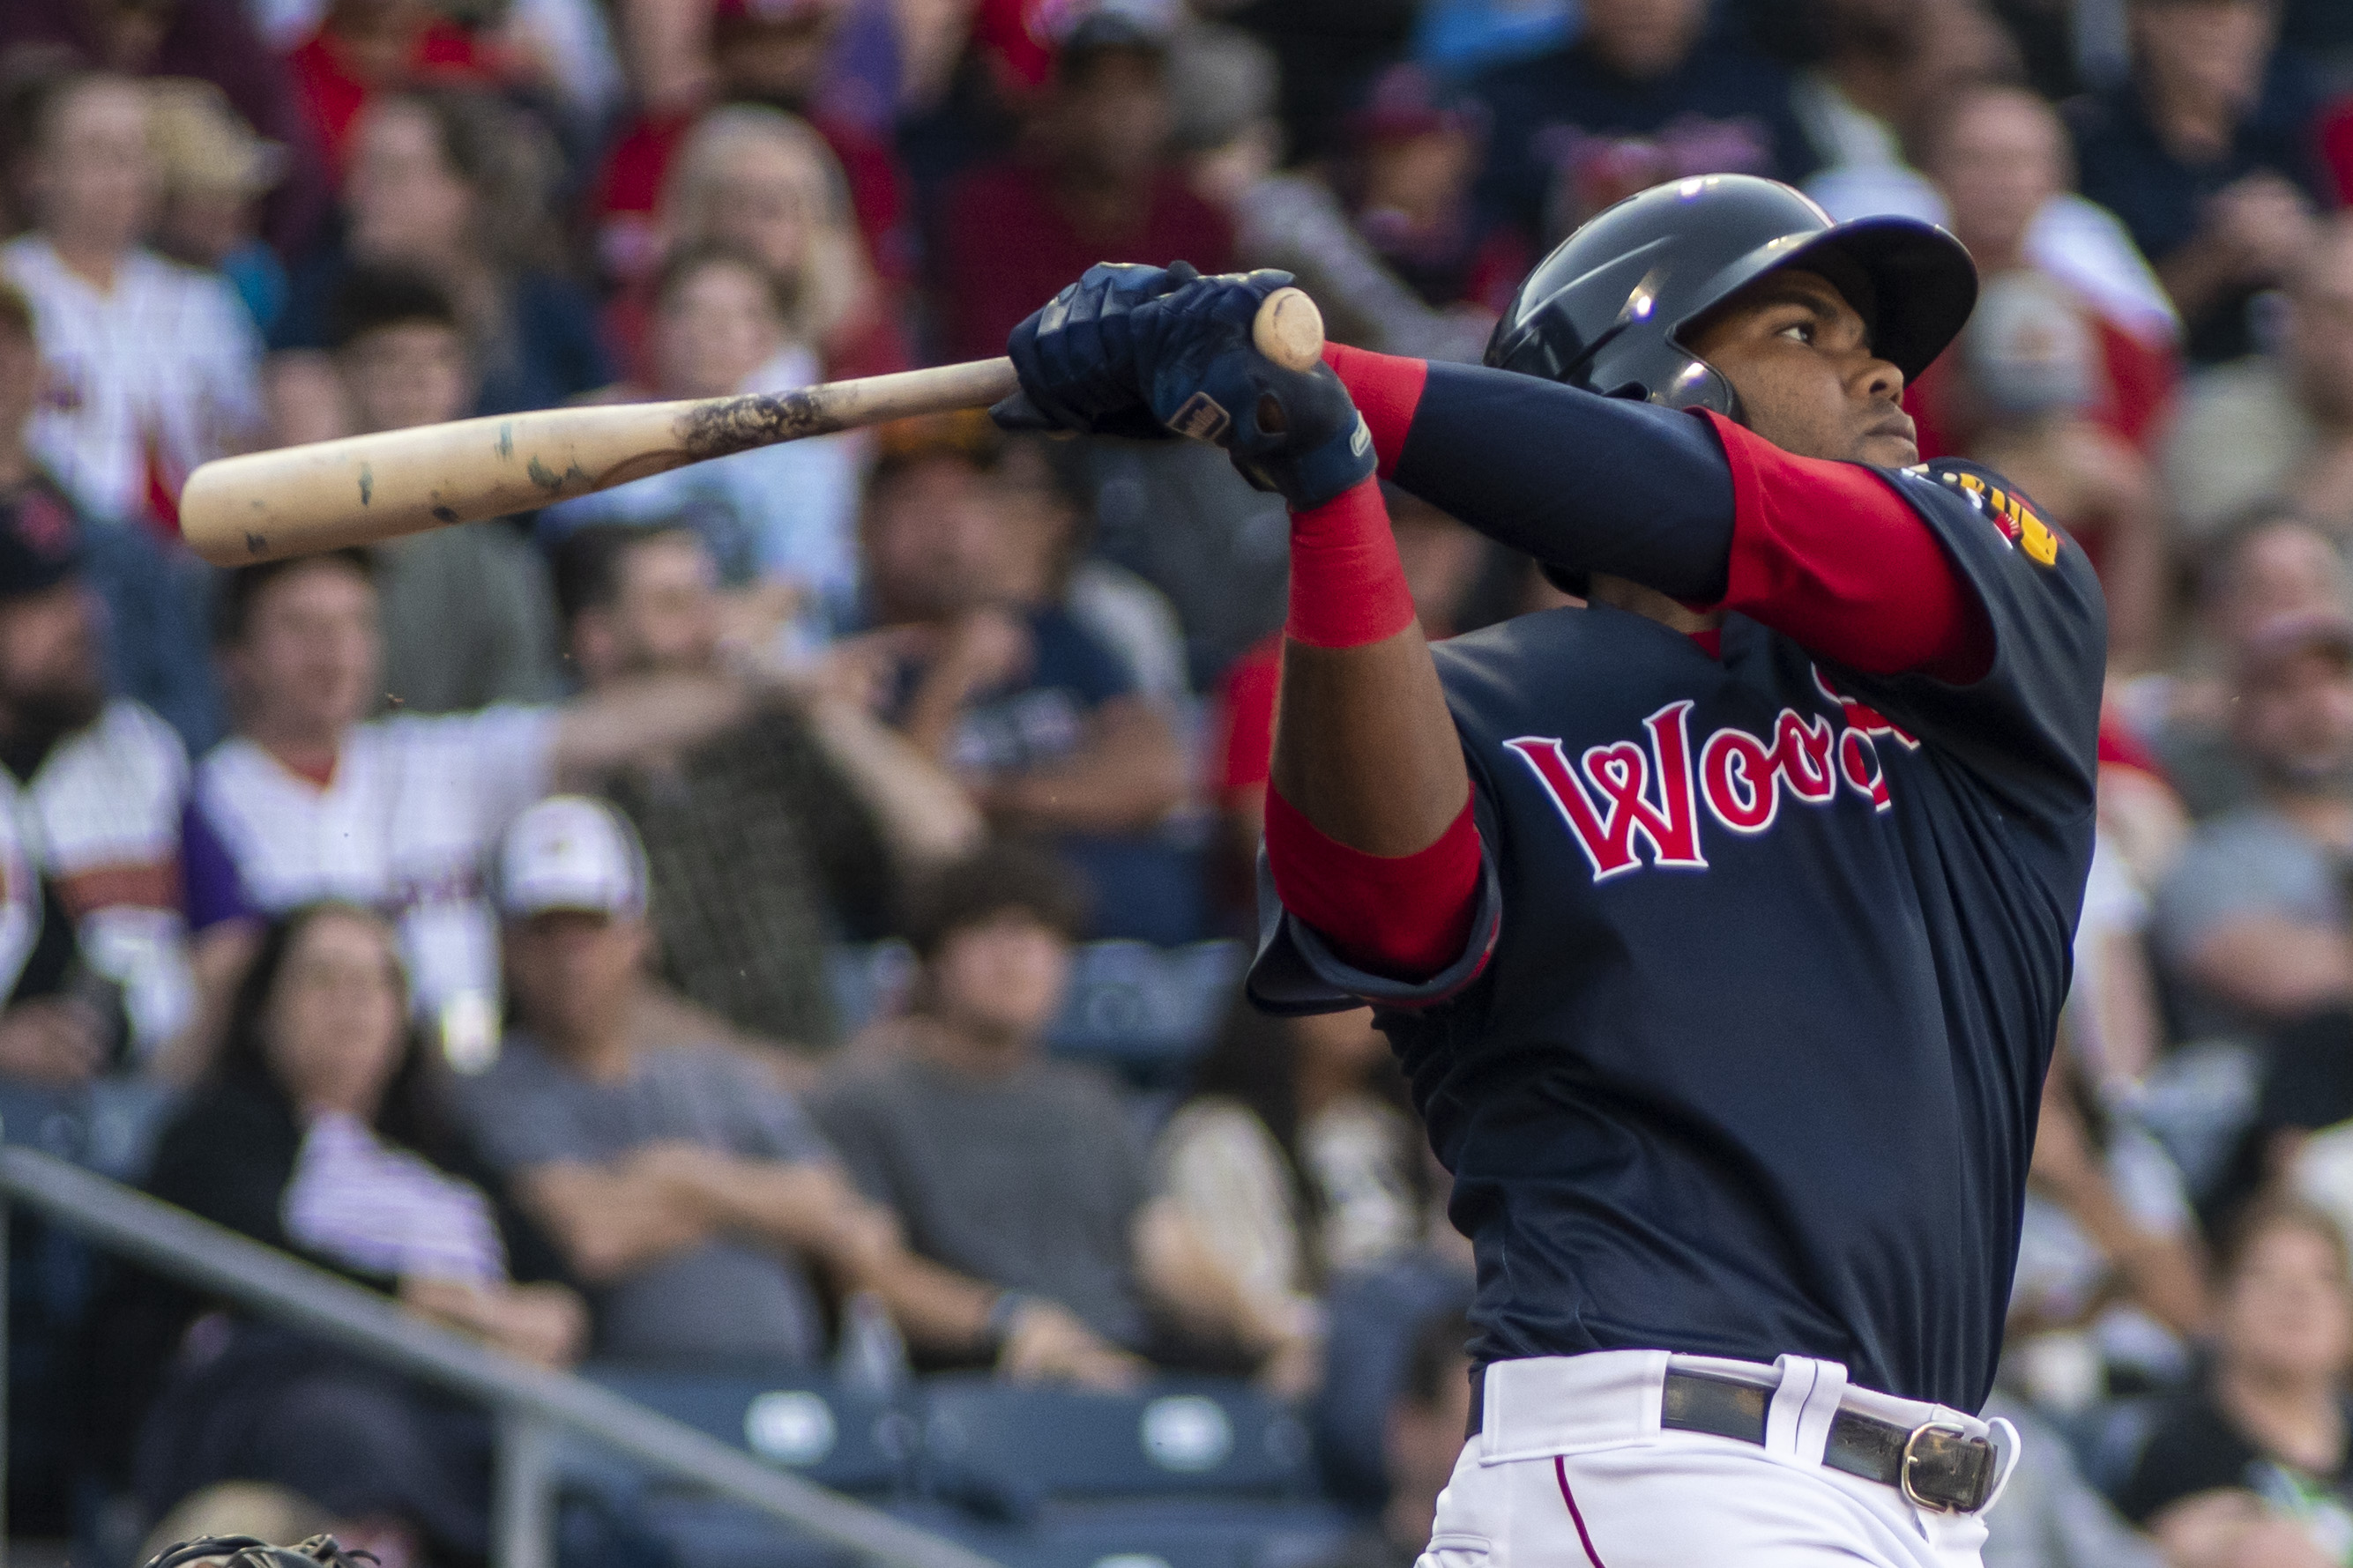 Despite an early lead, IronPigs lose to WooSox